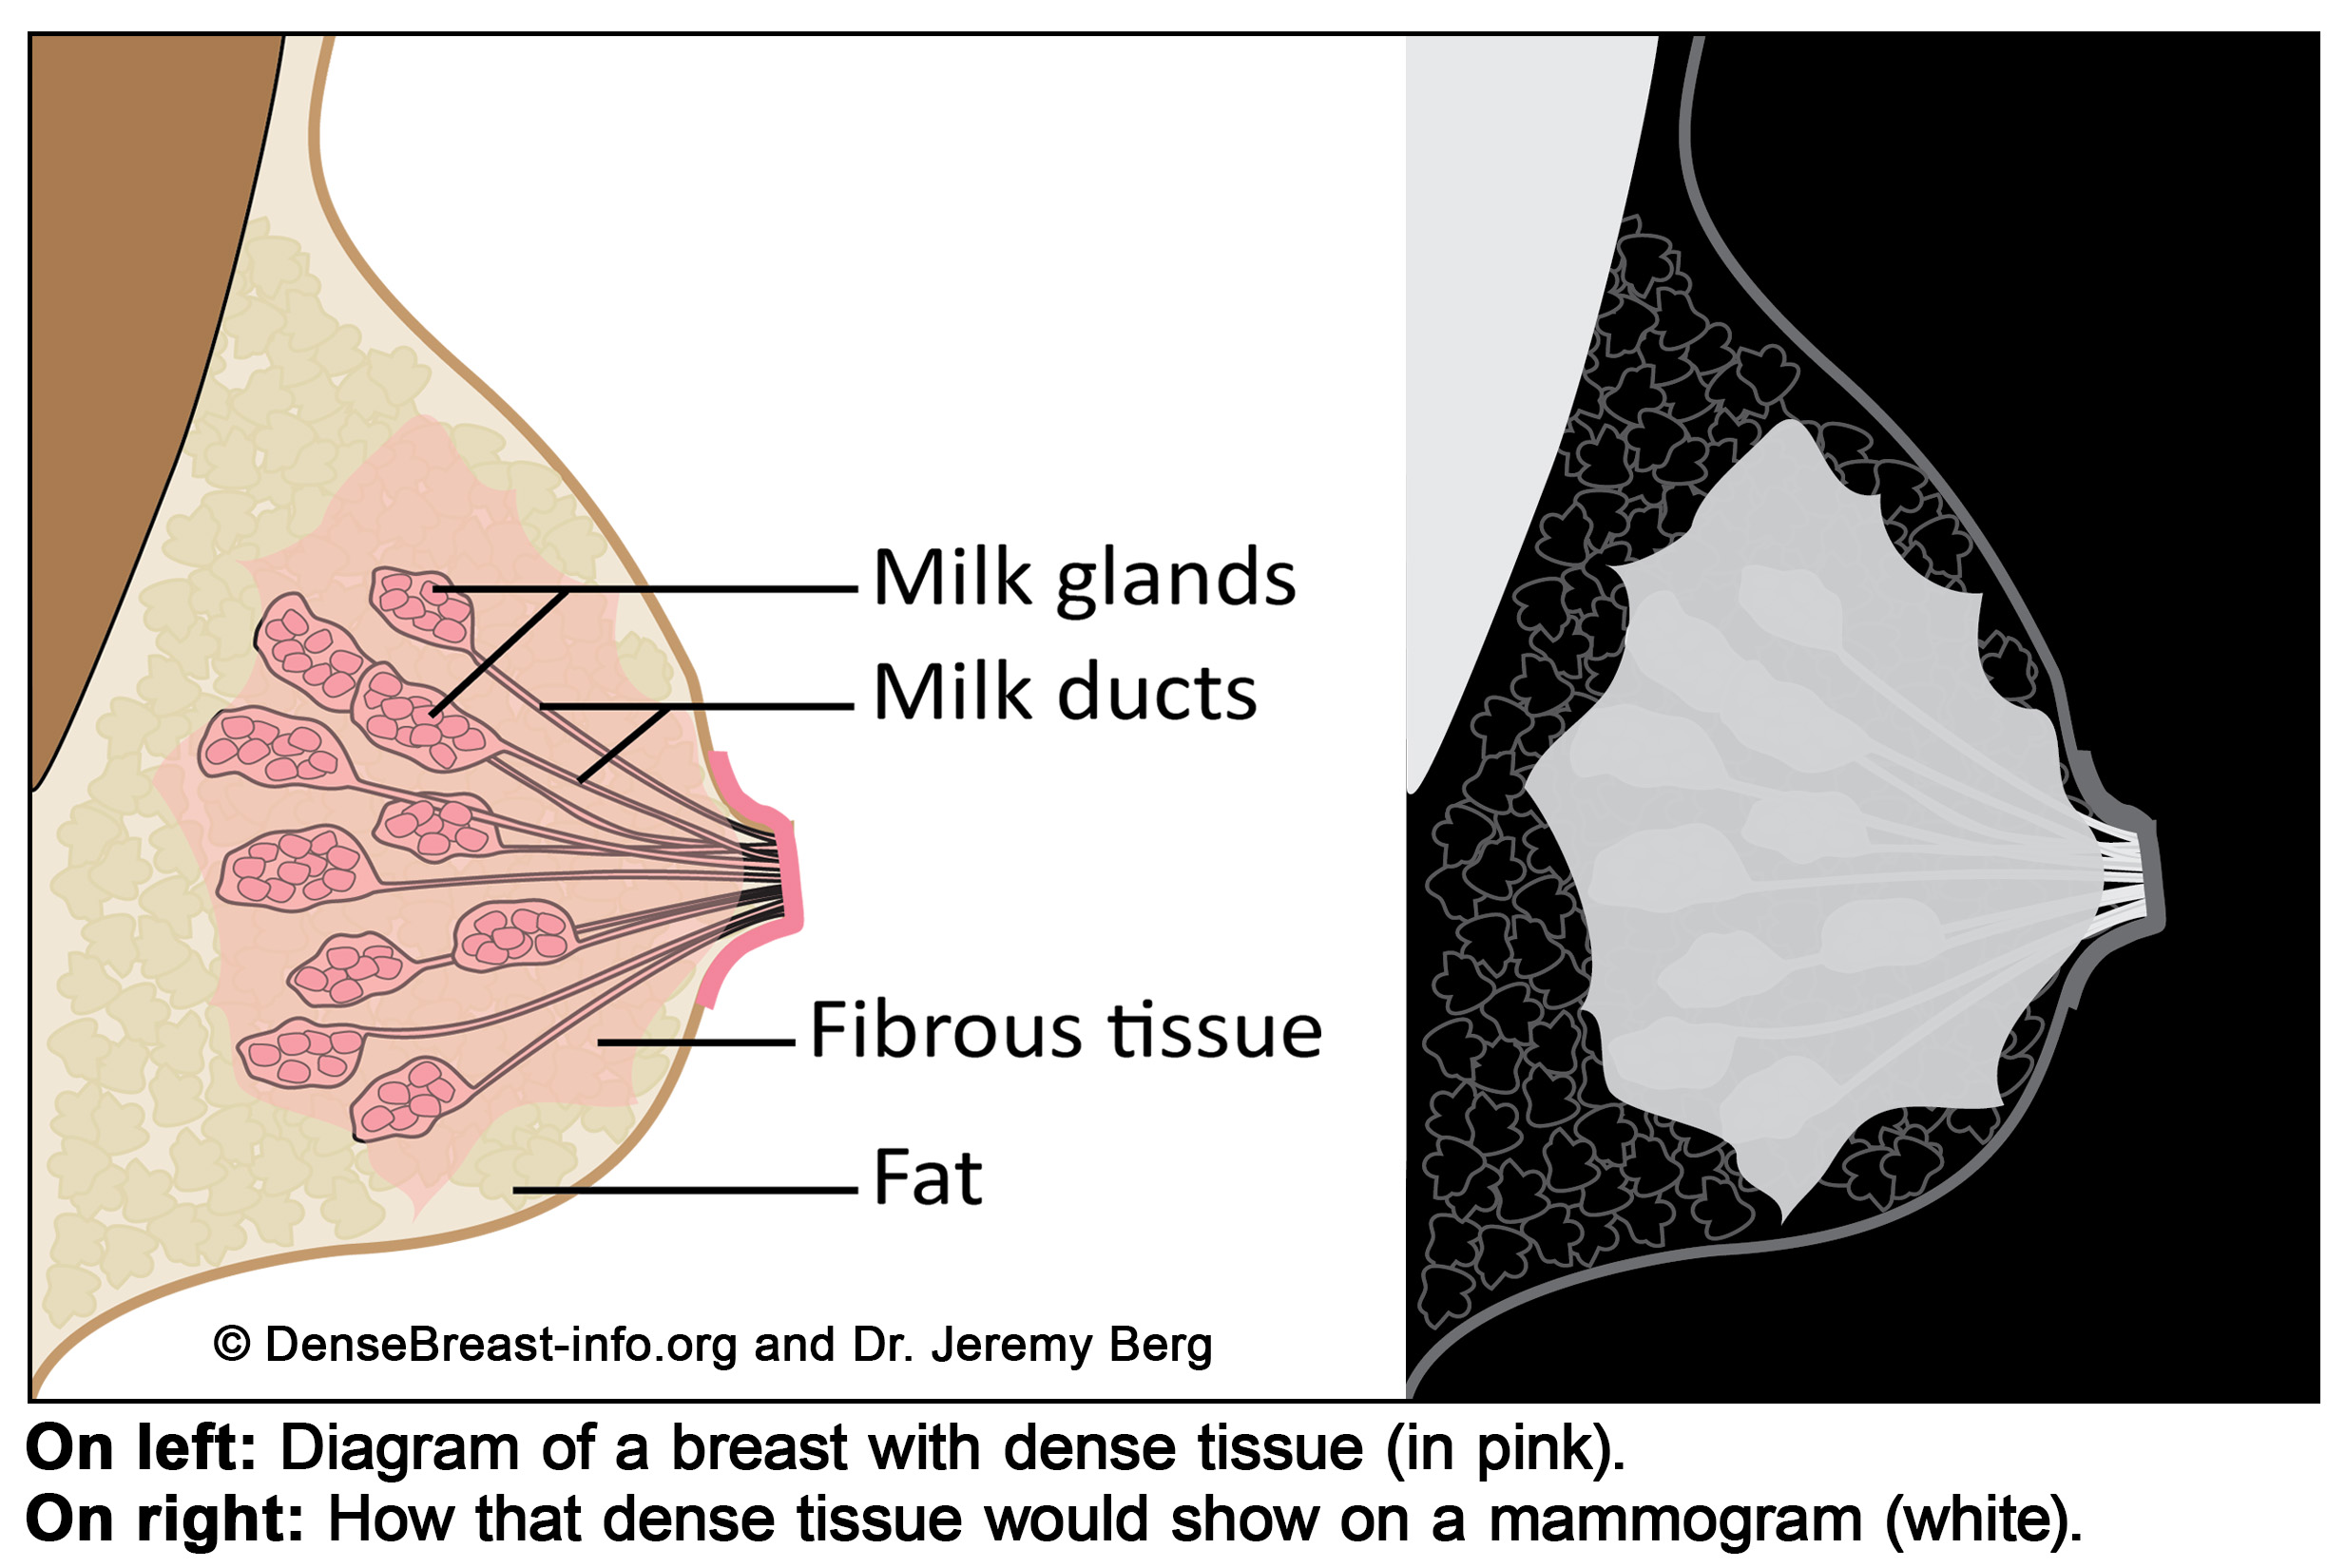 Five Things to Know About Dense Breasts